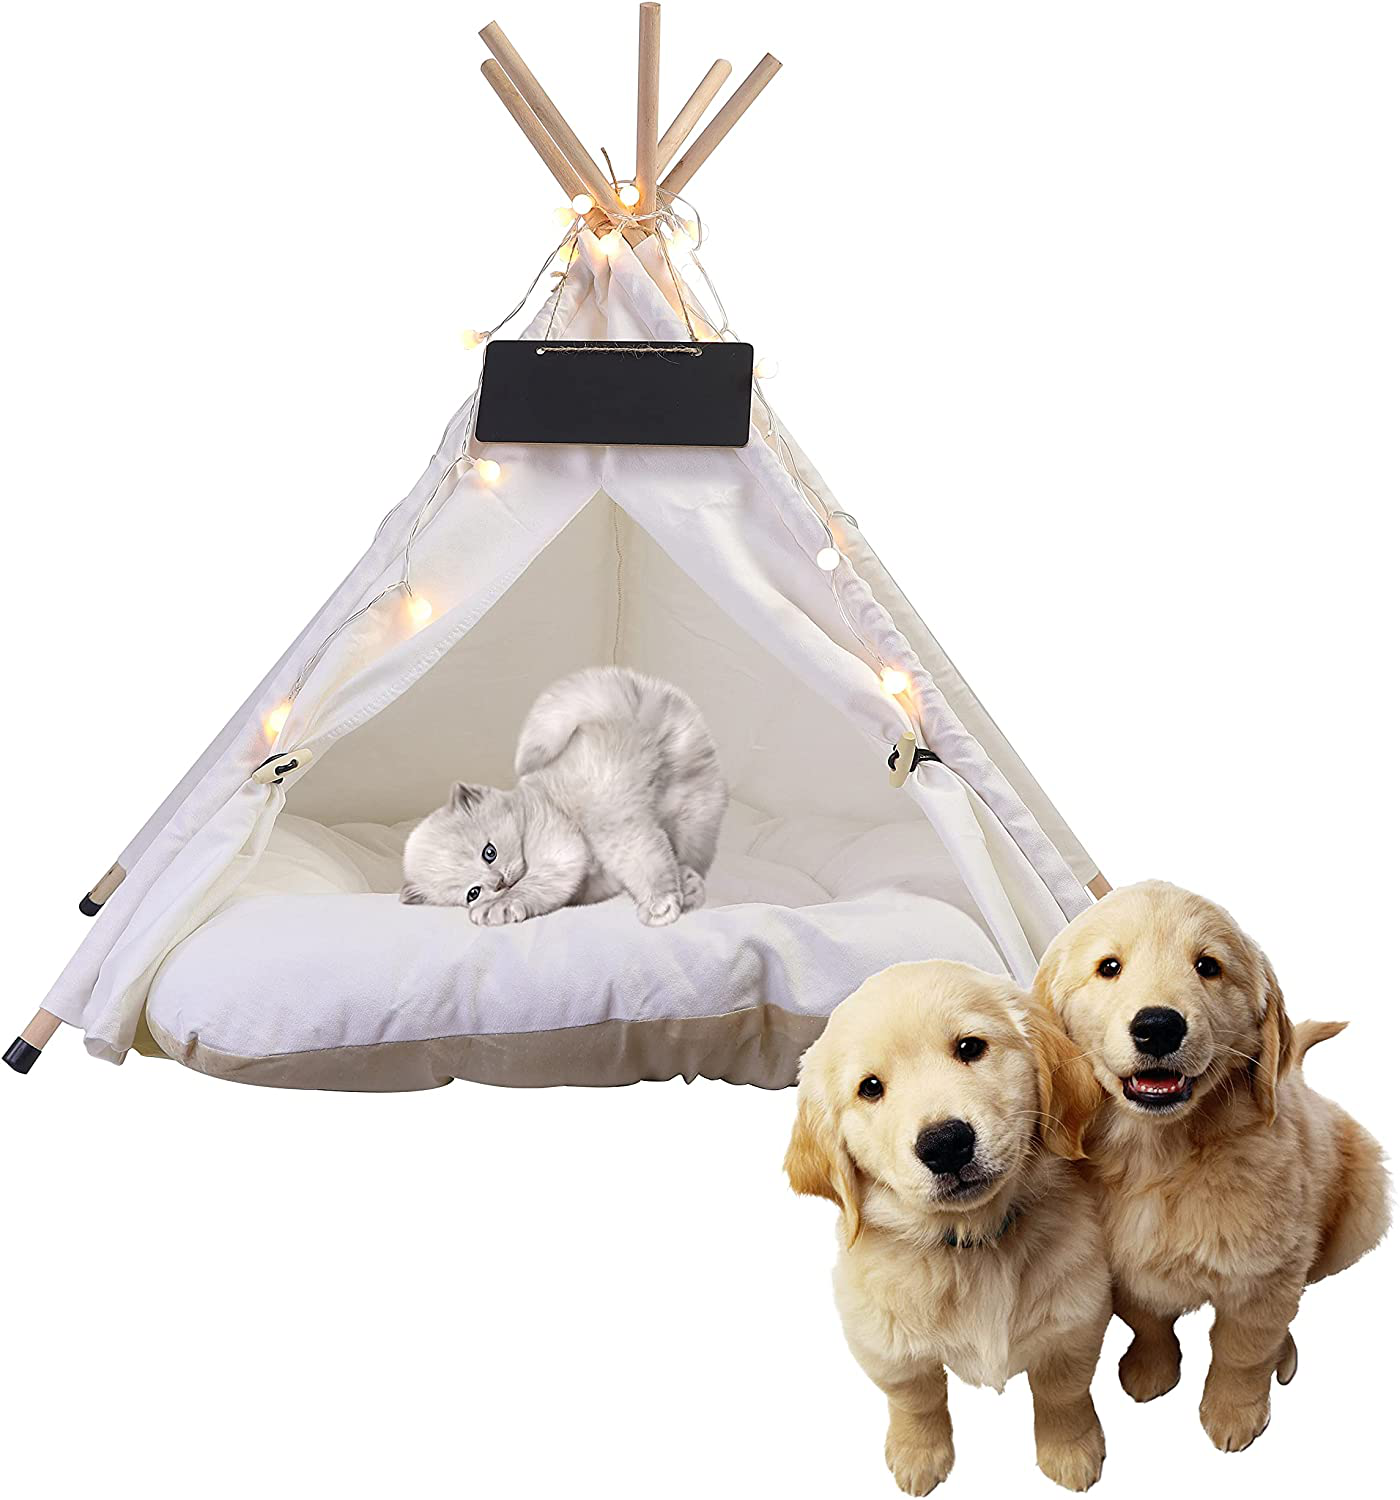 Peyamii Pet Tent Portable Puppy Sweet Bed Suitable for Small Dogs or Cats Natural Cotton Canvas with Cushions Lights Can Wash Kennels 20X20X24 Inches